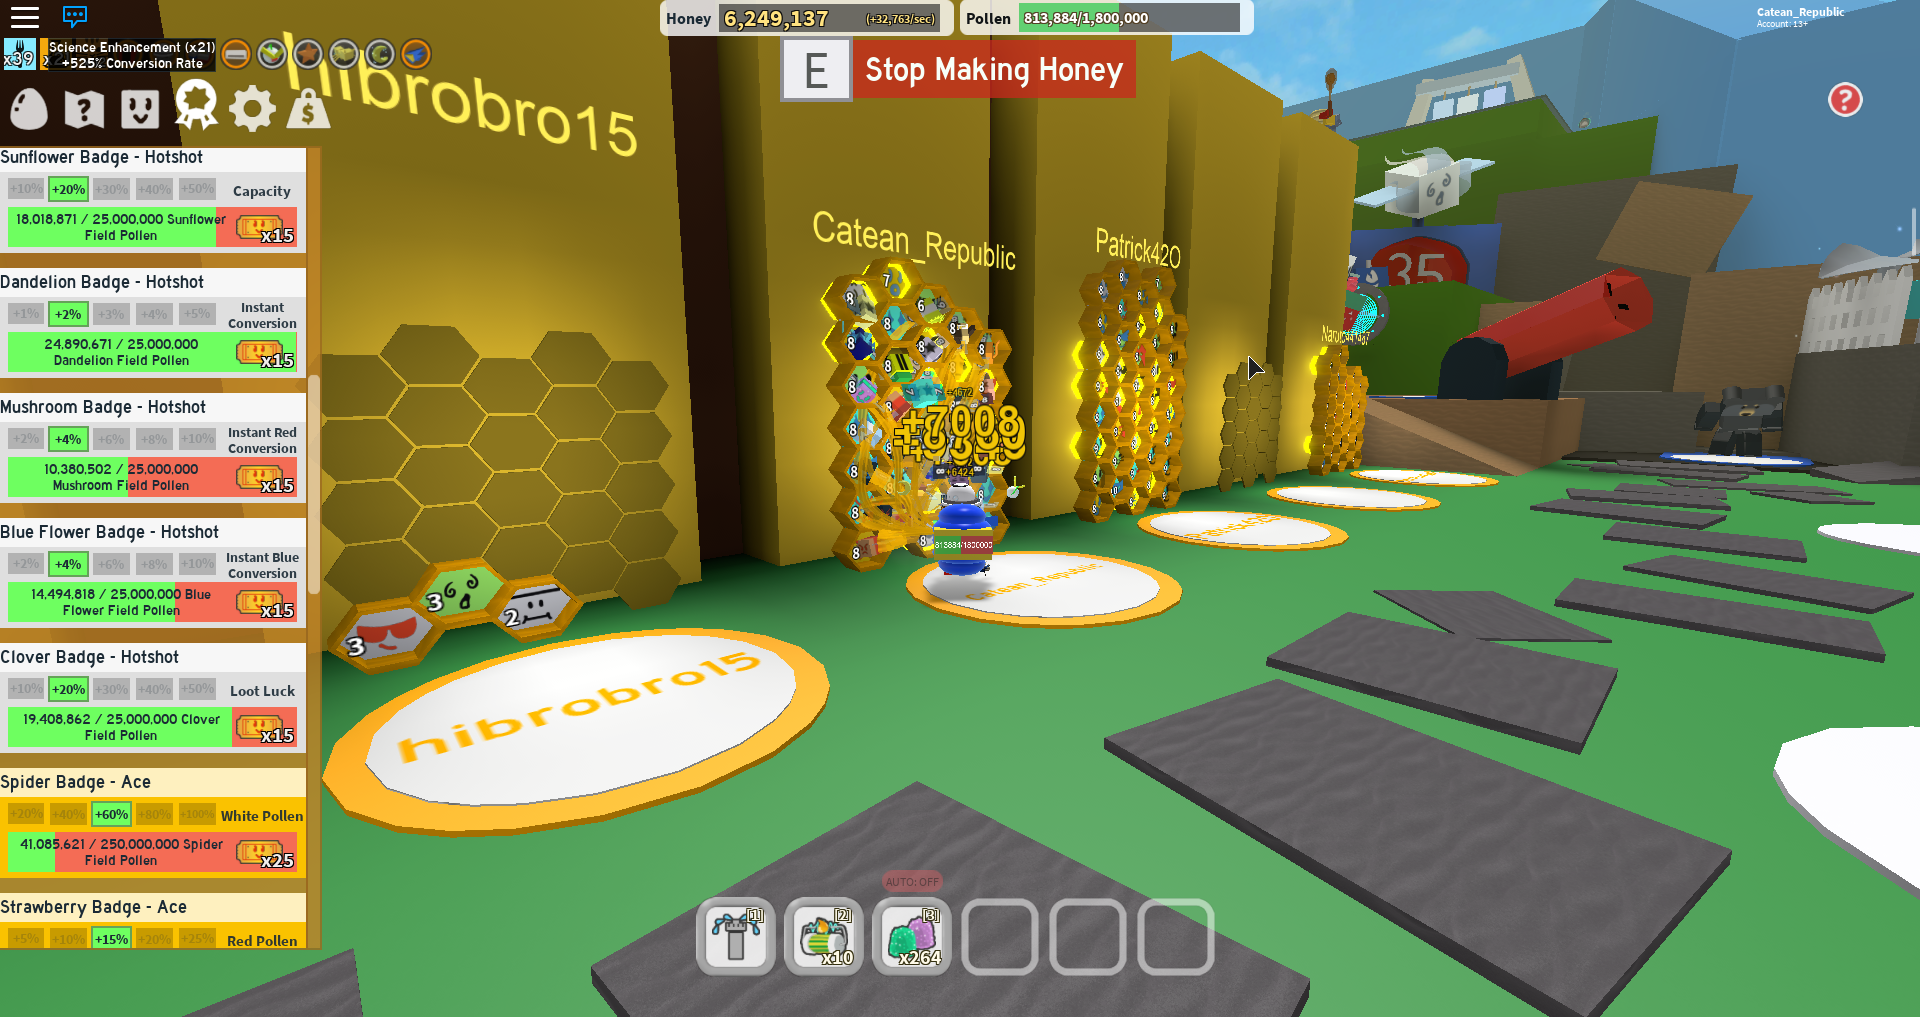 Robux Spending New Players Fandom - roblox bee swarm simulator instant conversion get robux games